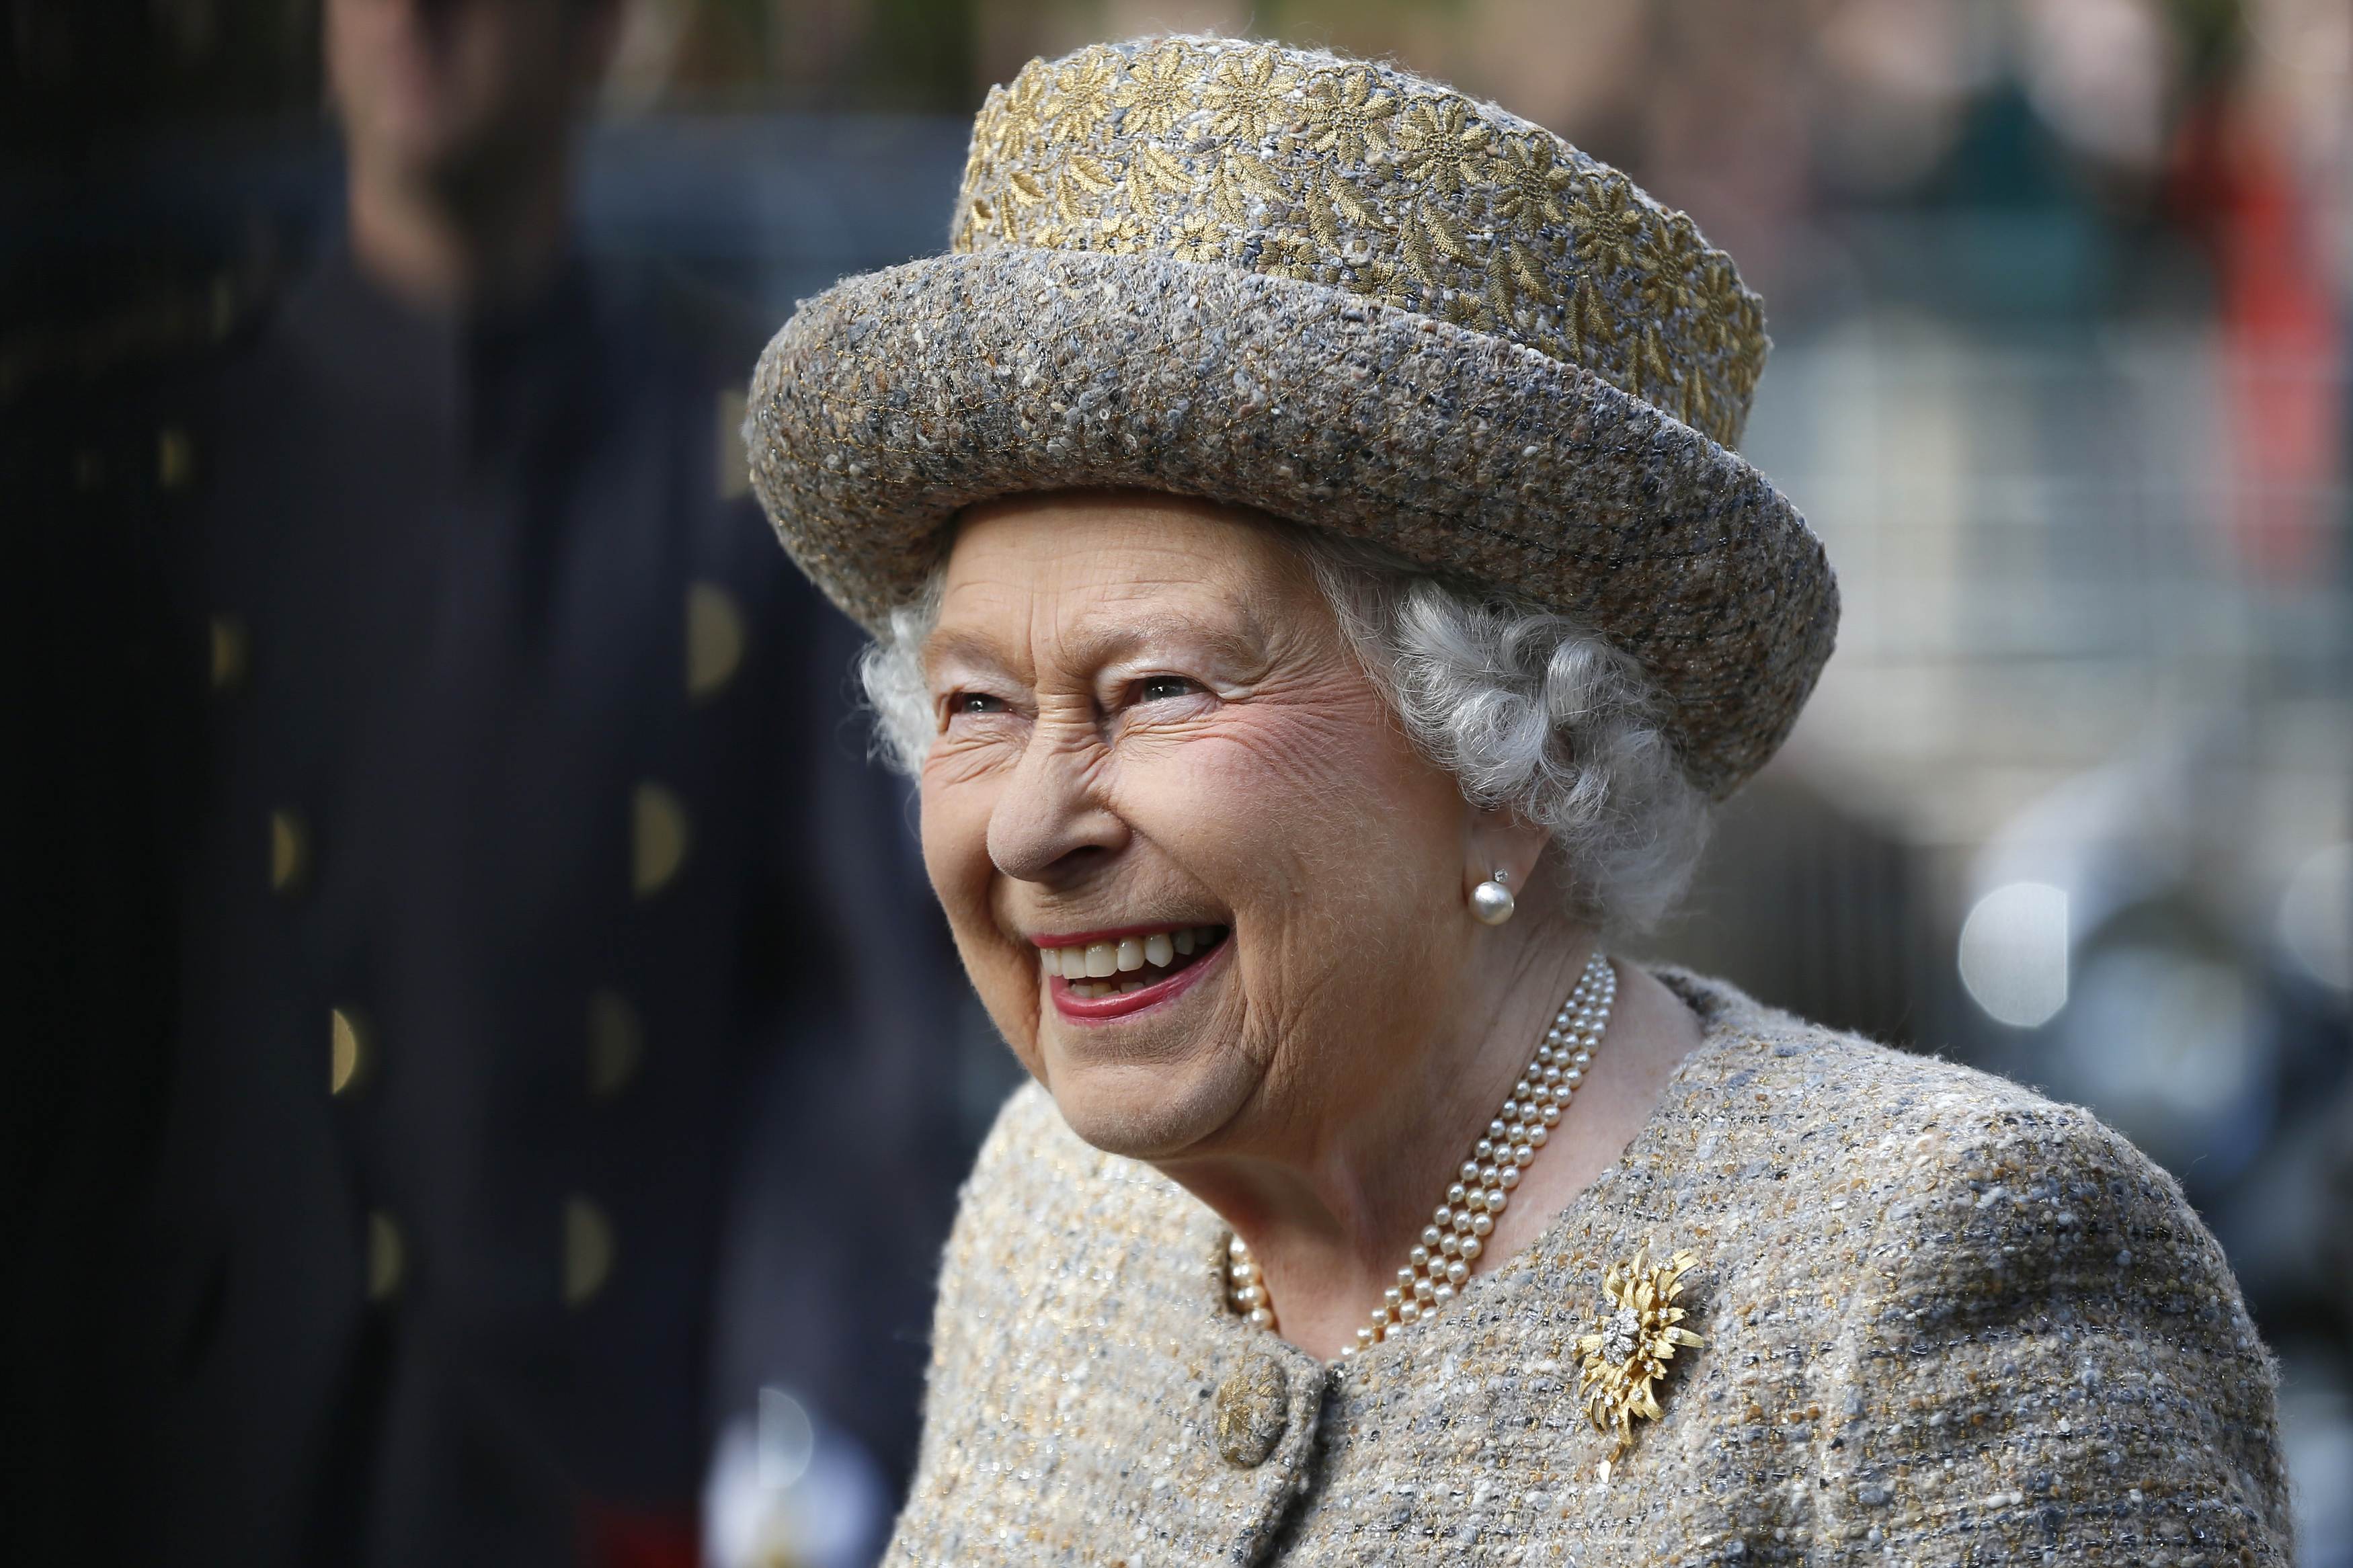 Queen Elizabeth II smiles as she arrives in London, England, before the Flanders' Fields Memorial Garden Opening at Wellington Barracks on November 6, 2014. | Source: Getty Images